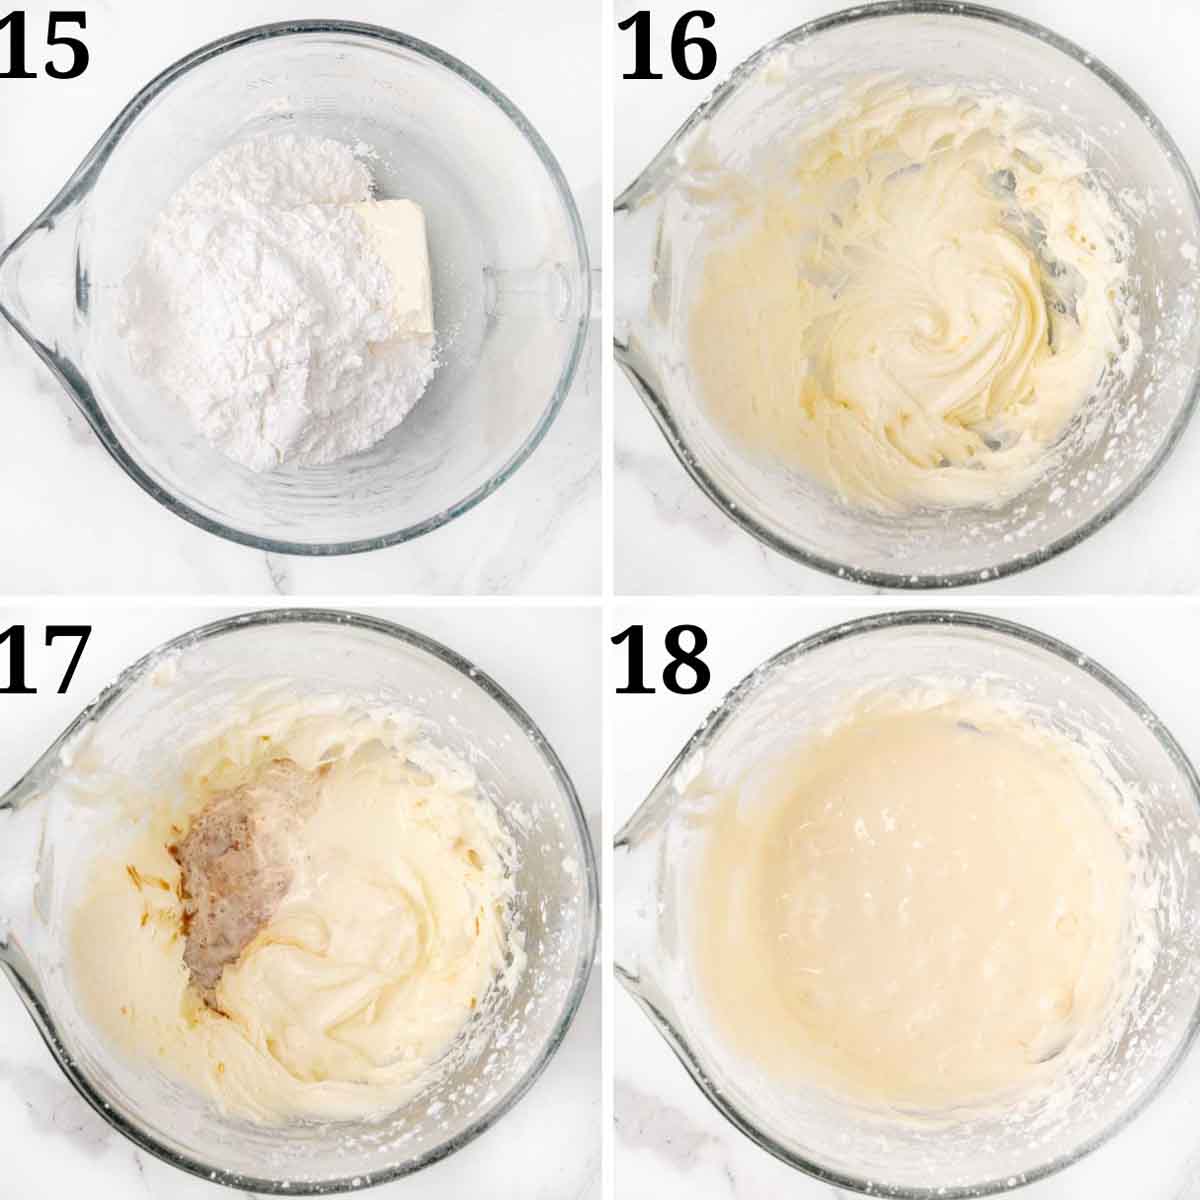 Collage showing how to make icing.